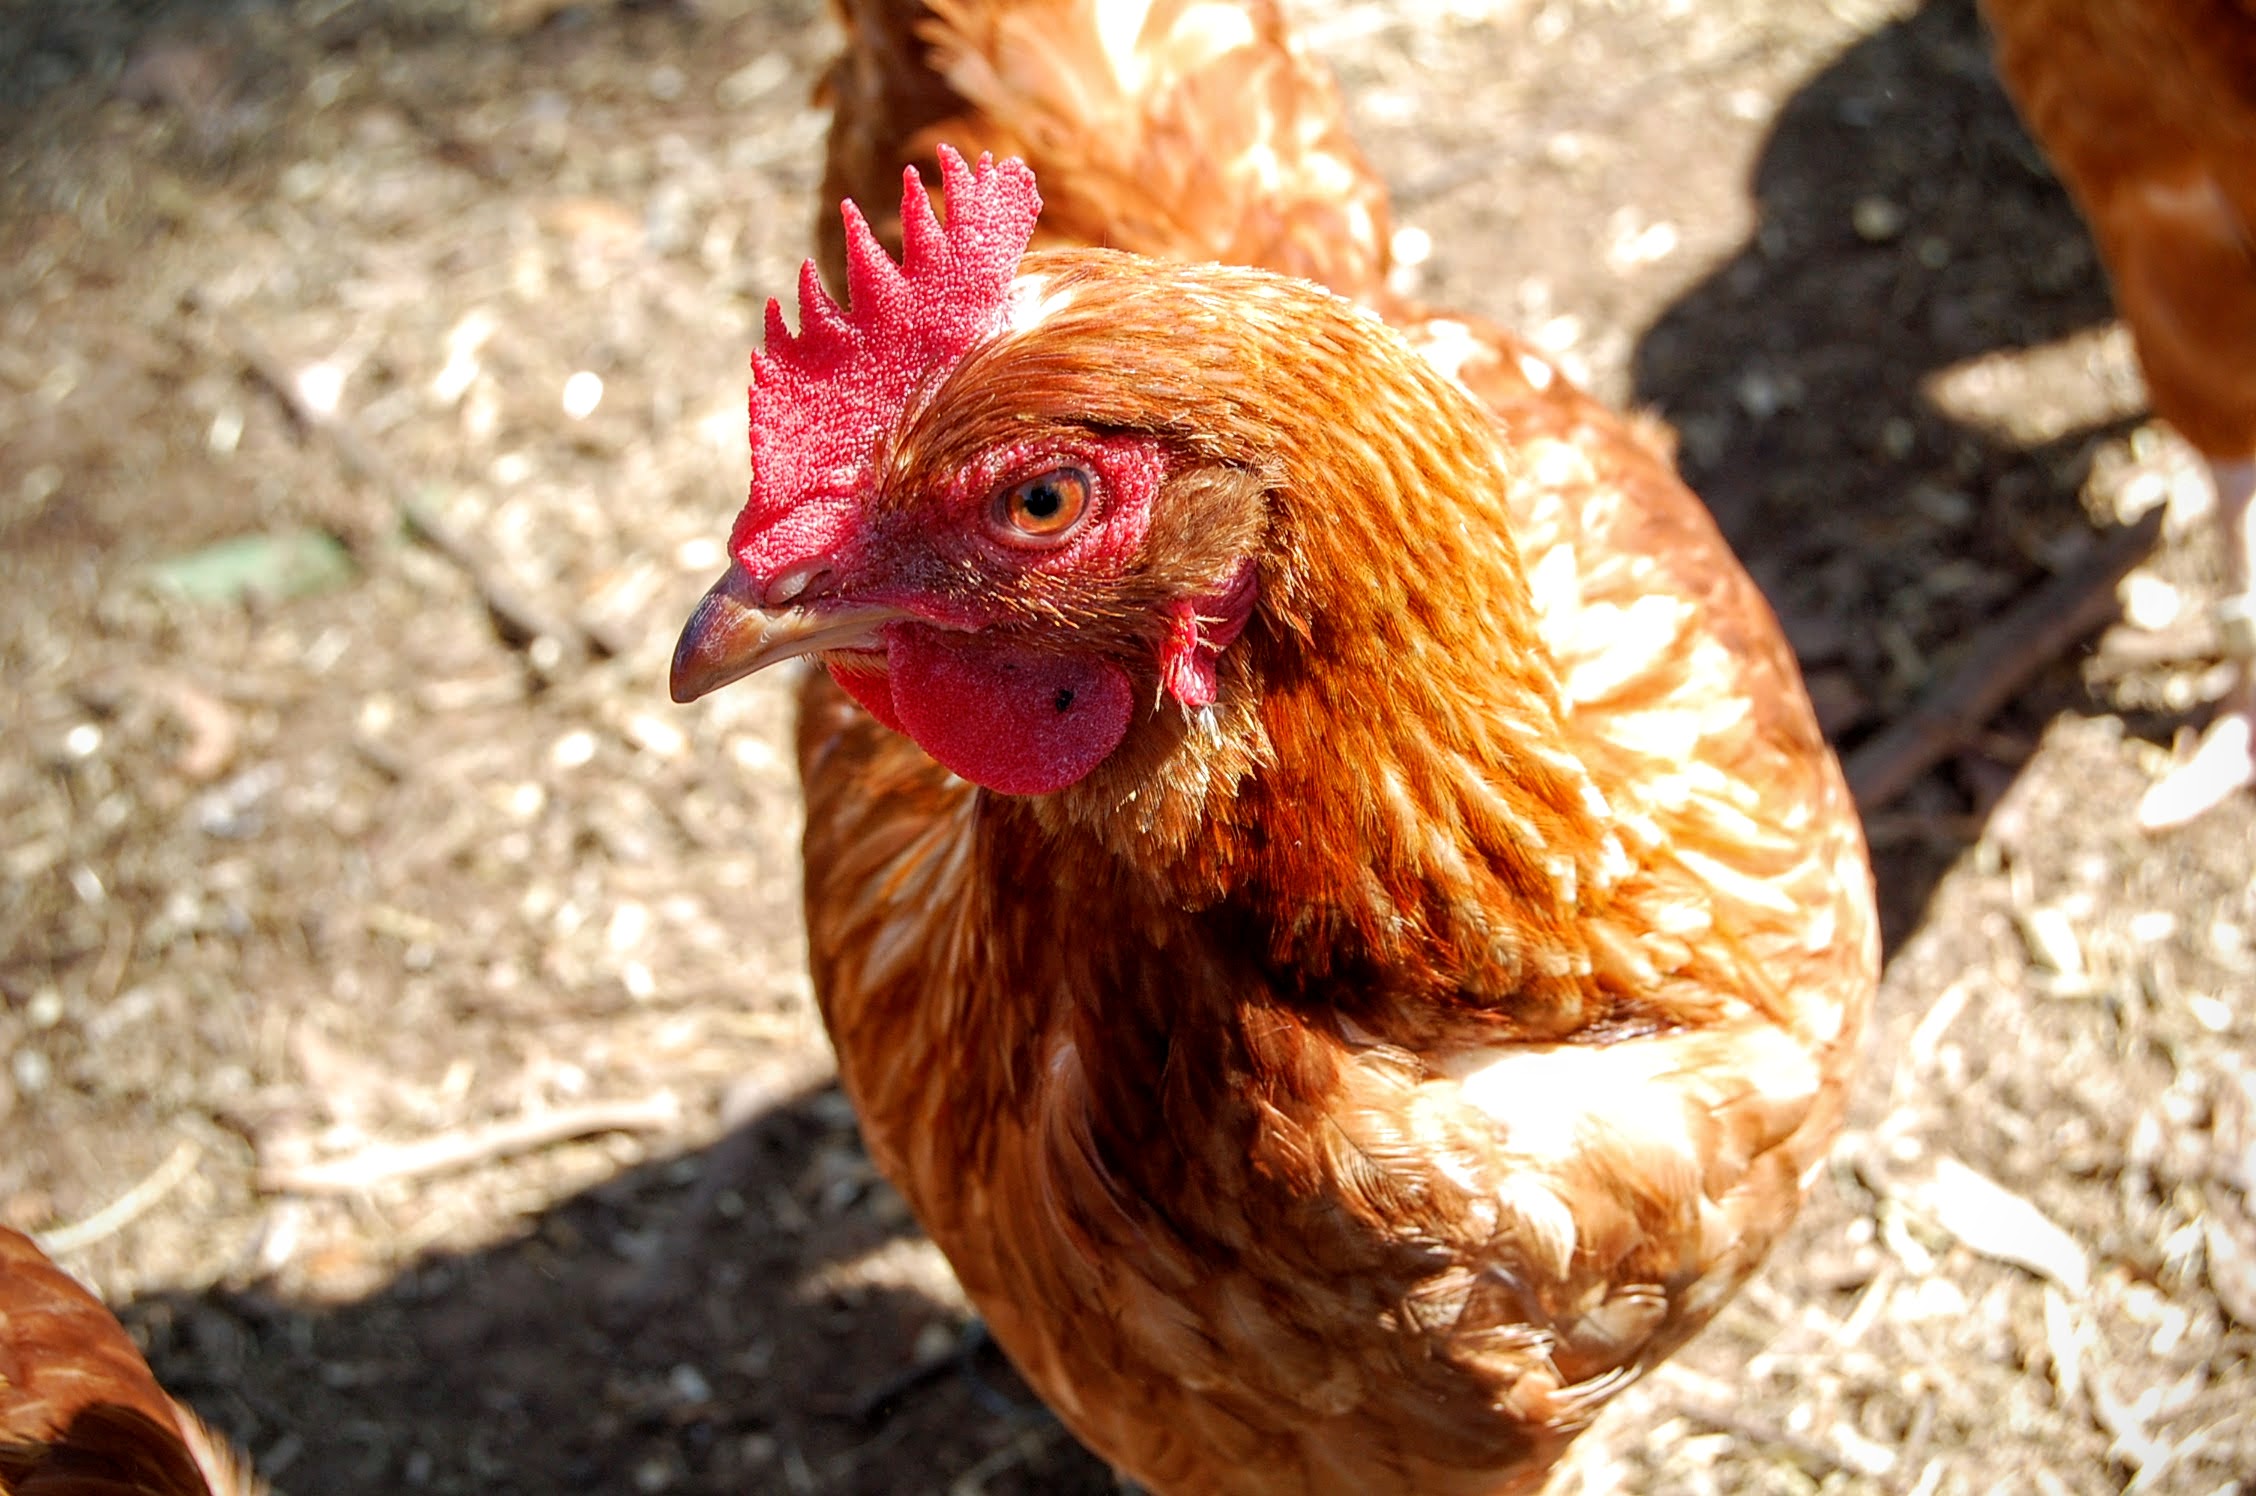 Close up photo of a chicken.